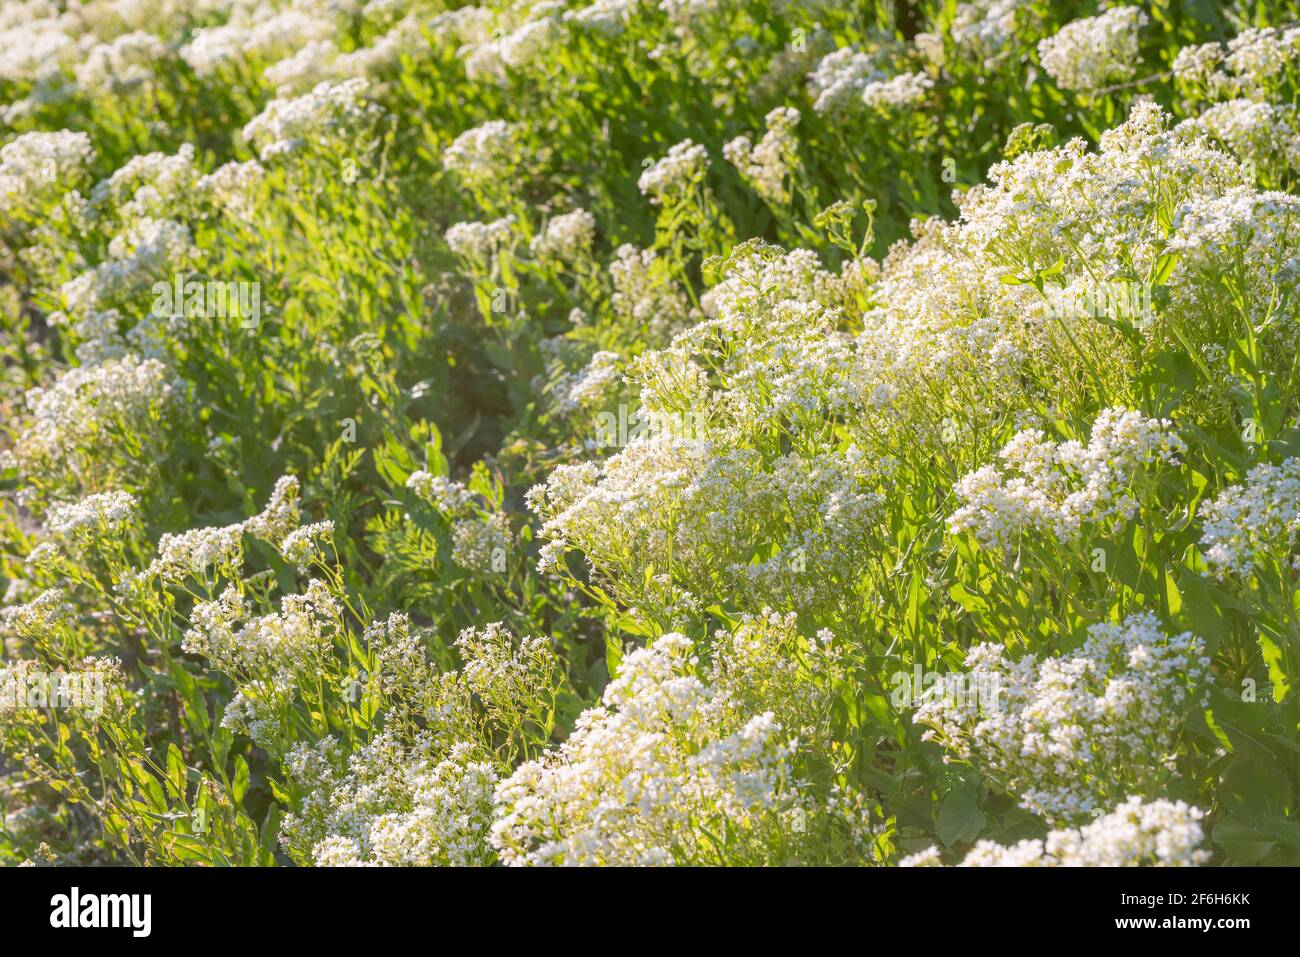 Wildflowers in spring with snowy white flowers, Heart-podded hoary cress (Cardaria draba) close up in sunny day Stock Photo